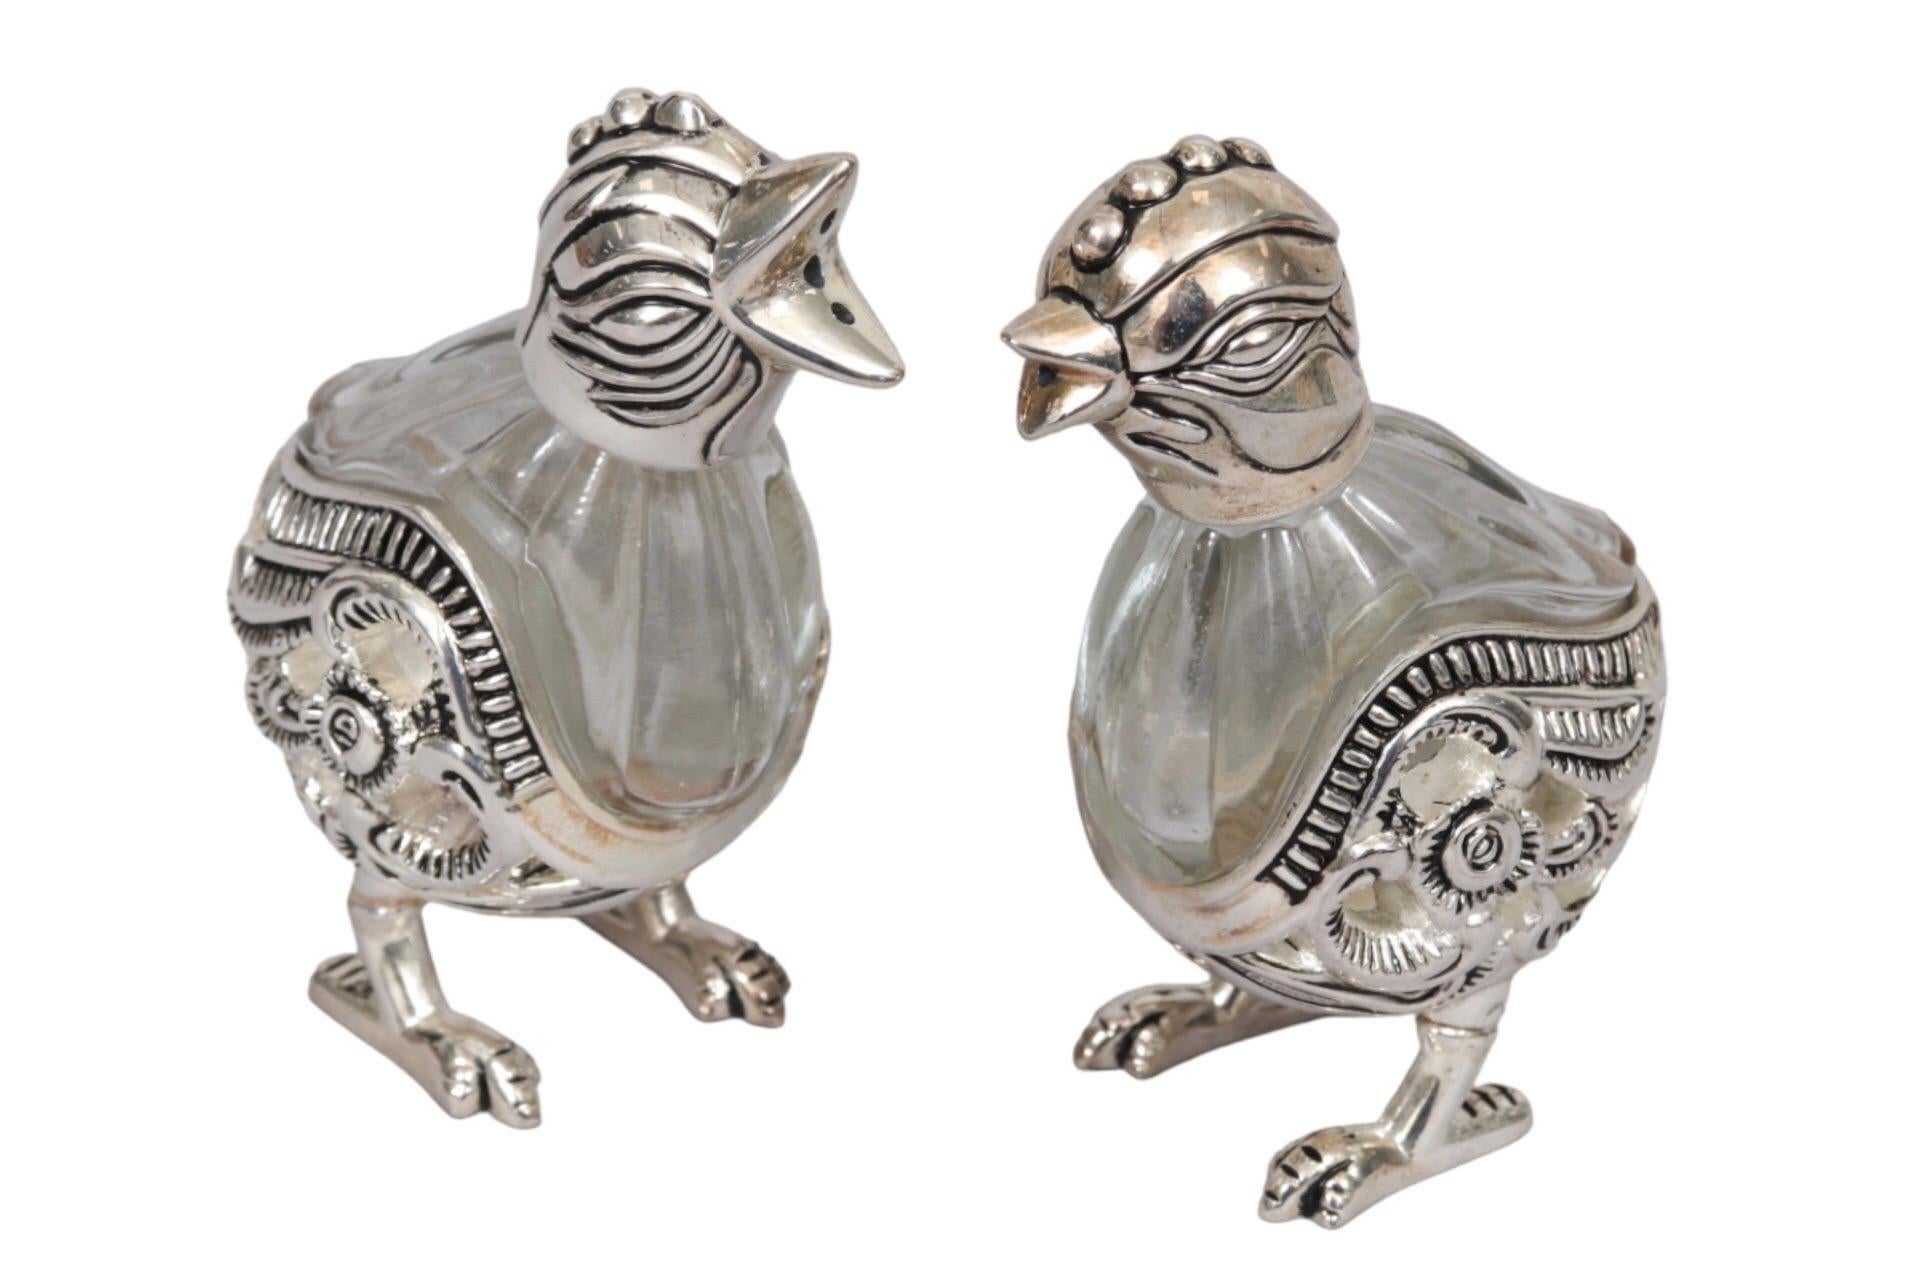 A pair of silver plated and cut glass salt and pepper shakers in the shape of chicks. Made by Godinger Silver Art Company for Neiman Marcus. Ornately cut glass vase bodies are finished with silver plate details including caps shaped like birds'